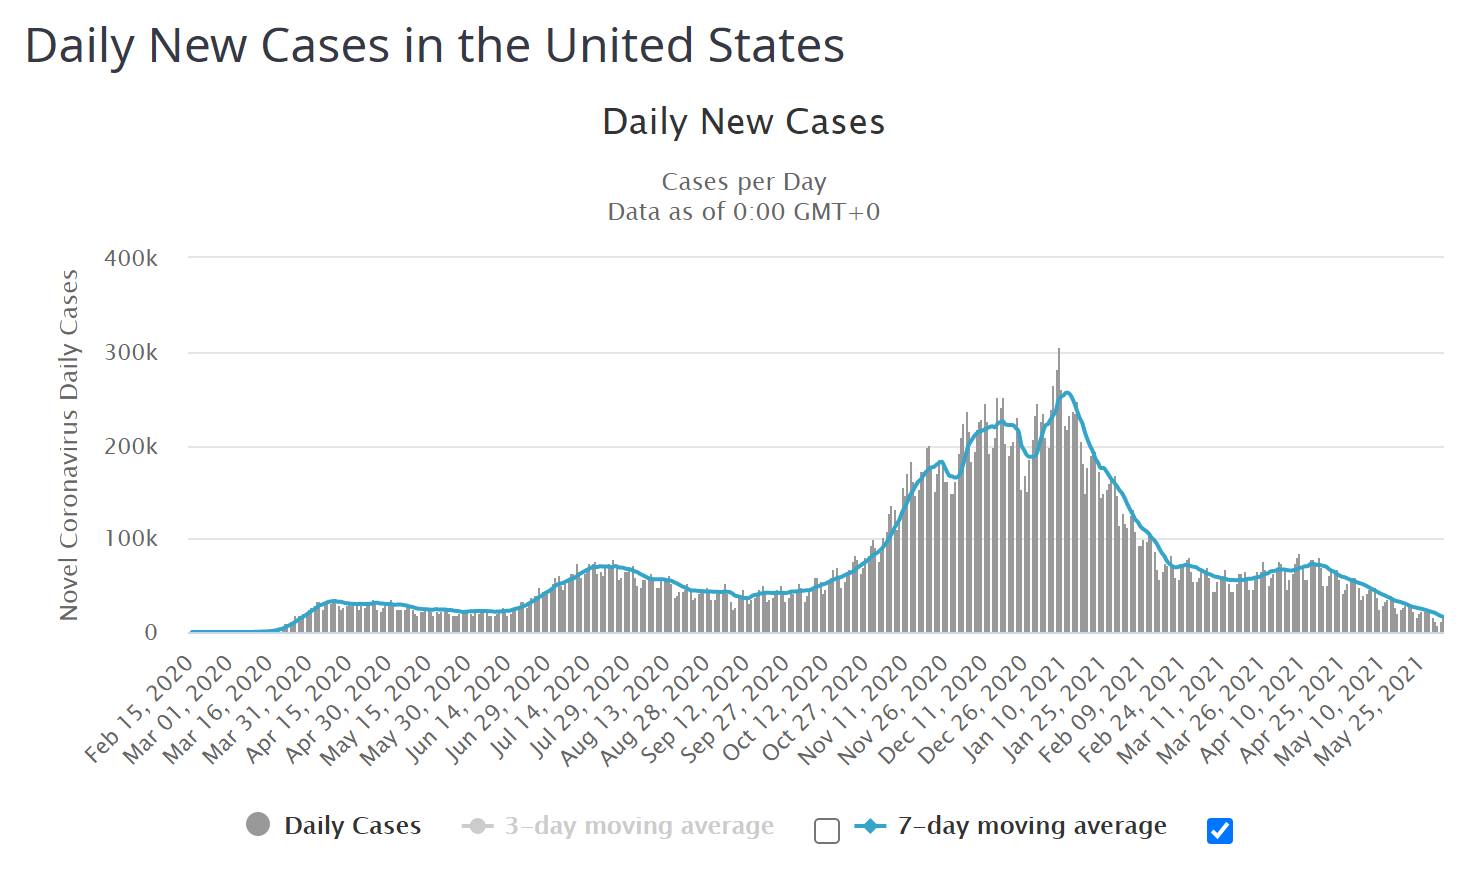 New COVID cases in the US are approaching zero